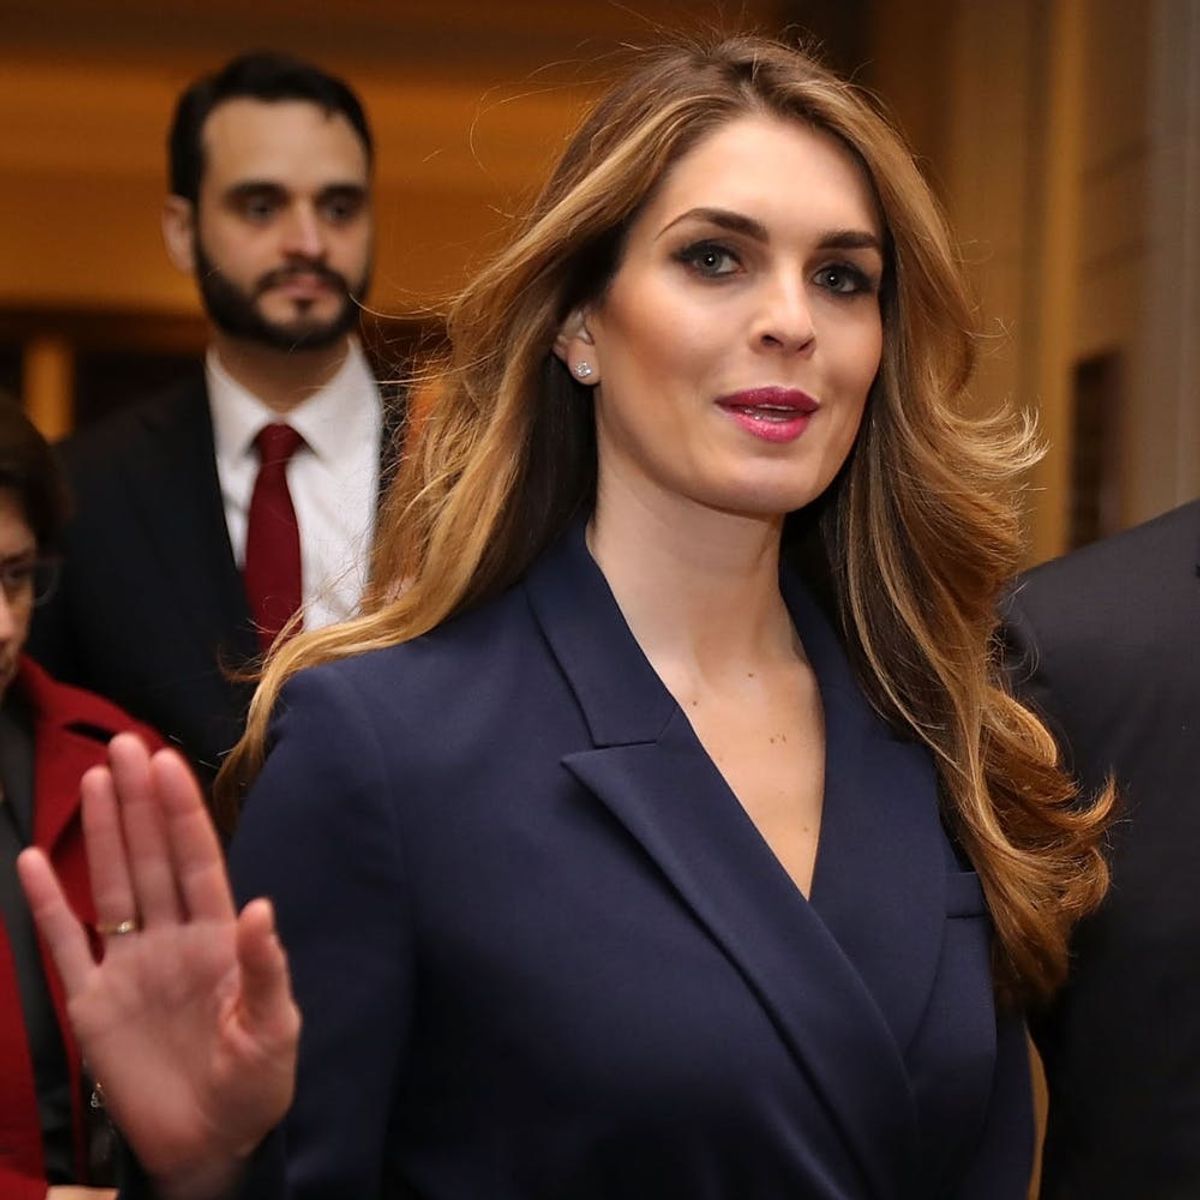 Hope Hicks Is Resigning as White House Communications Director